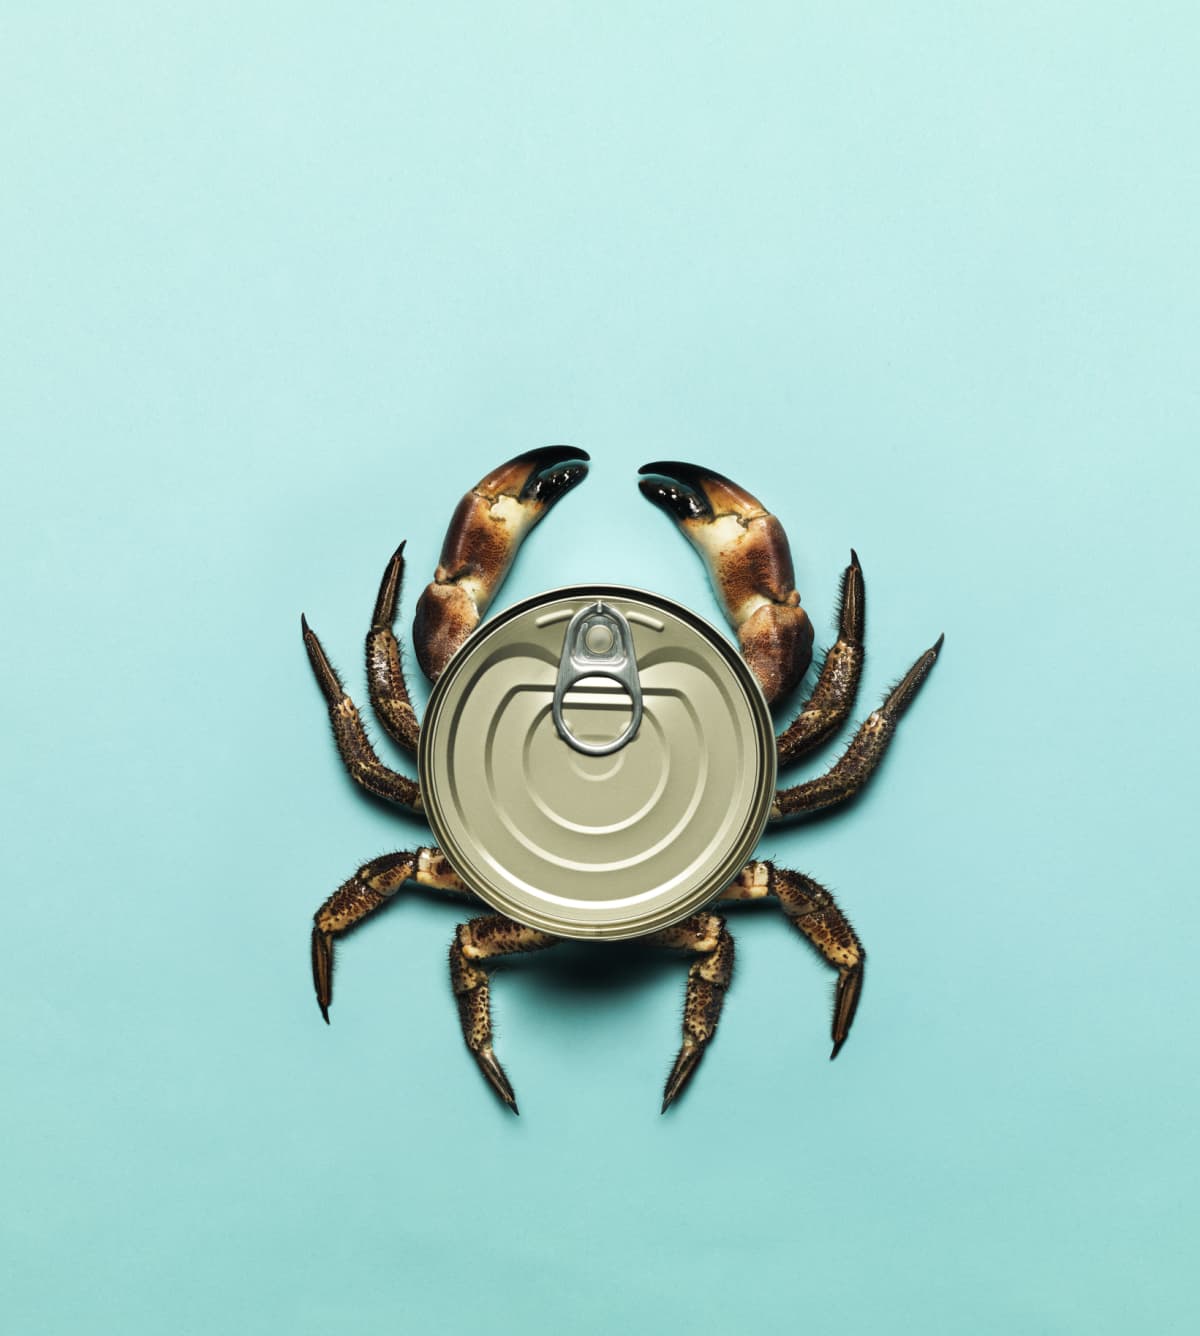 Combination of a can and a crab on a bright blue background